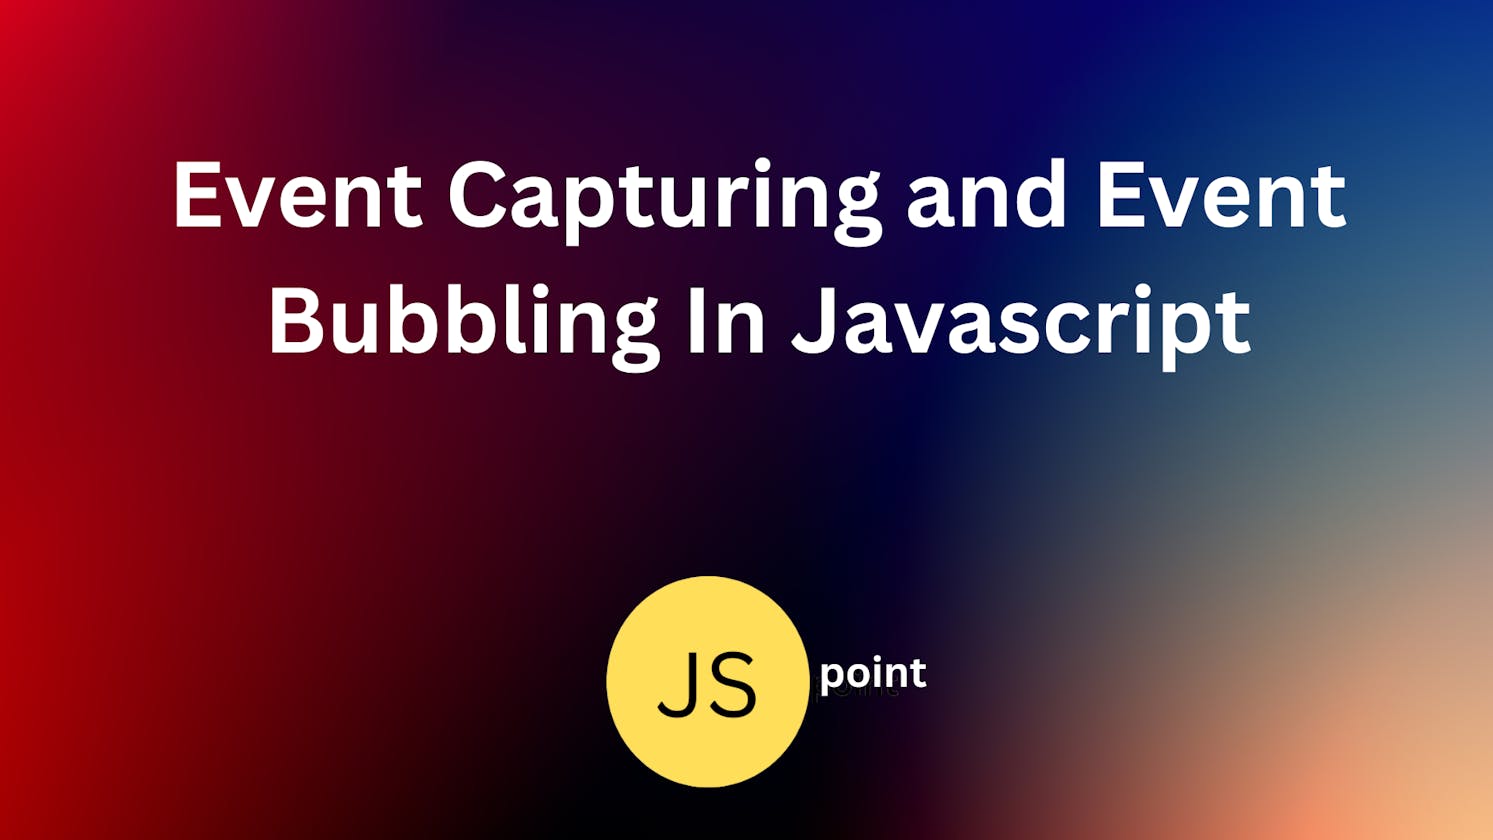 Event Capturing And Event Bubbling In JavaScript